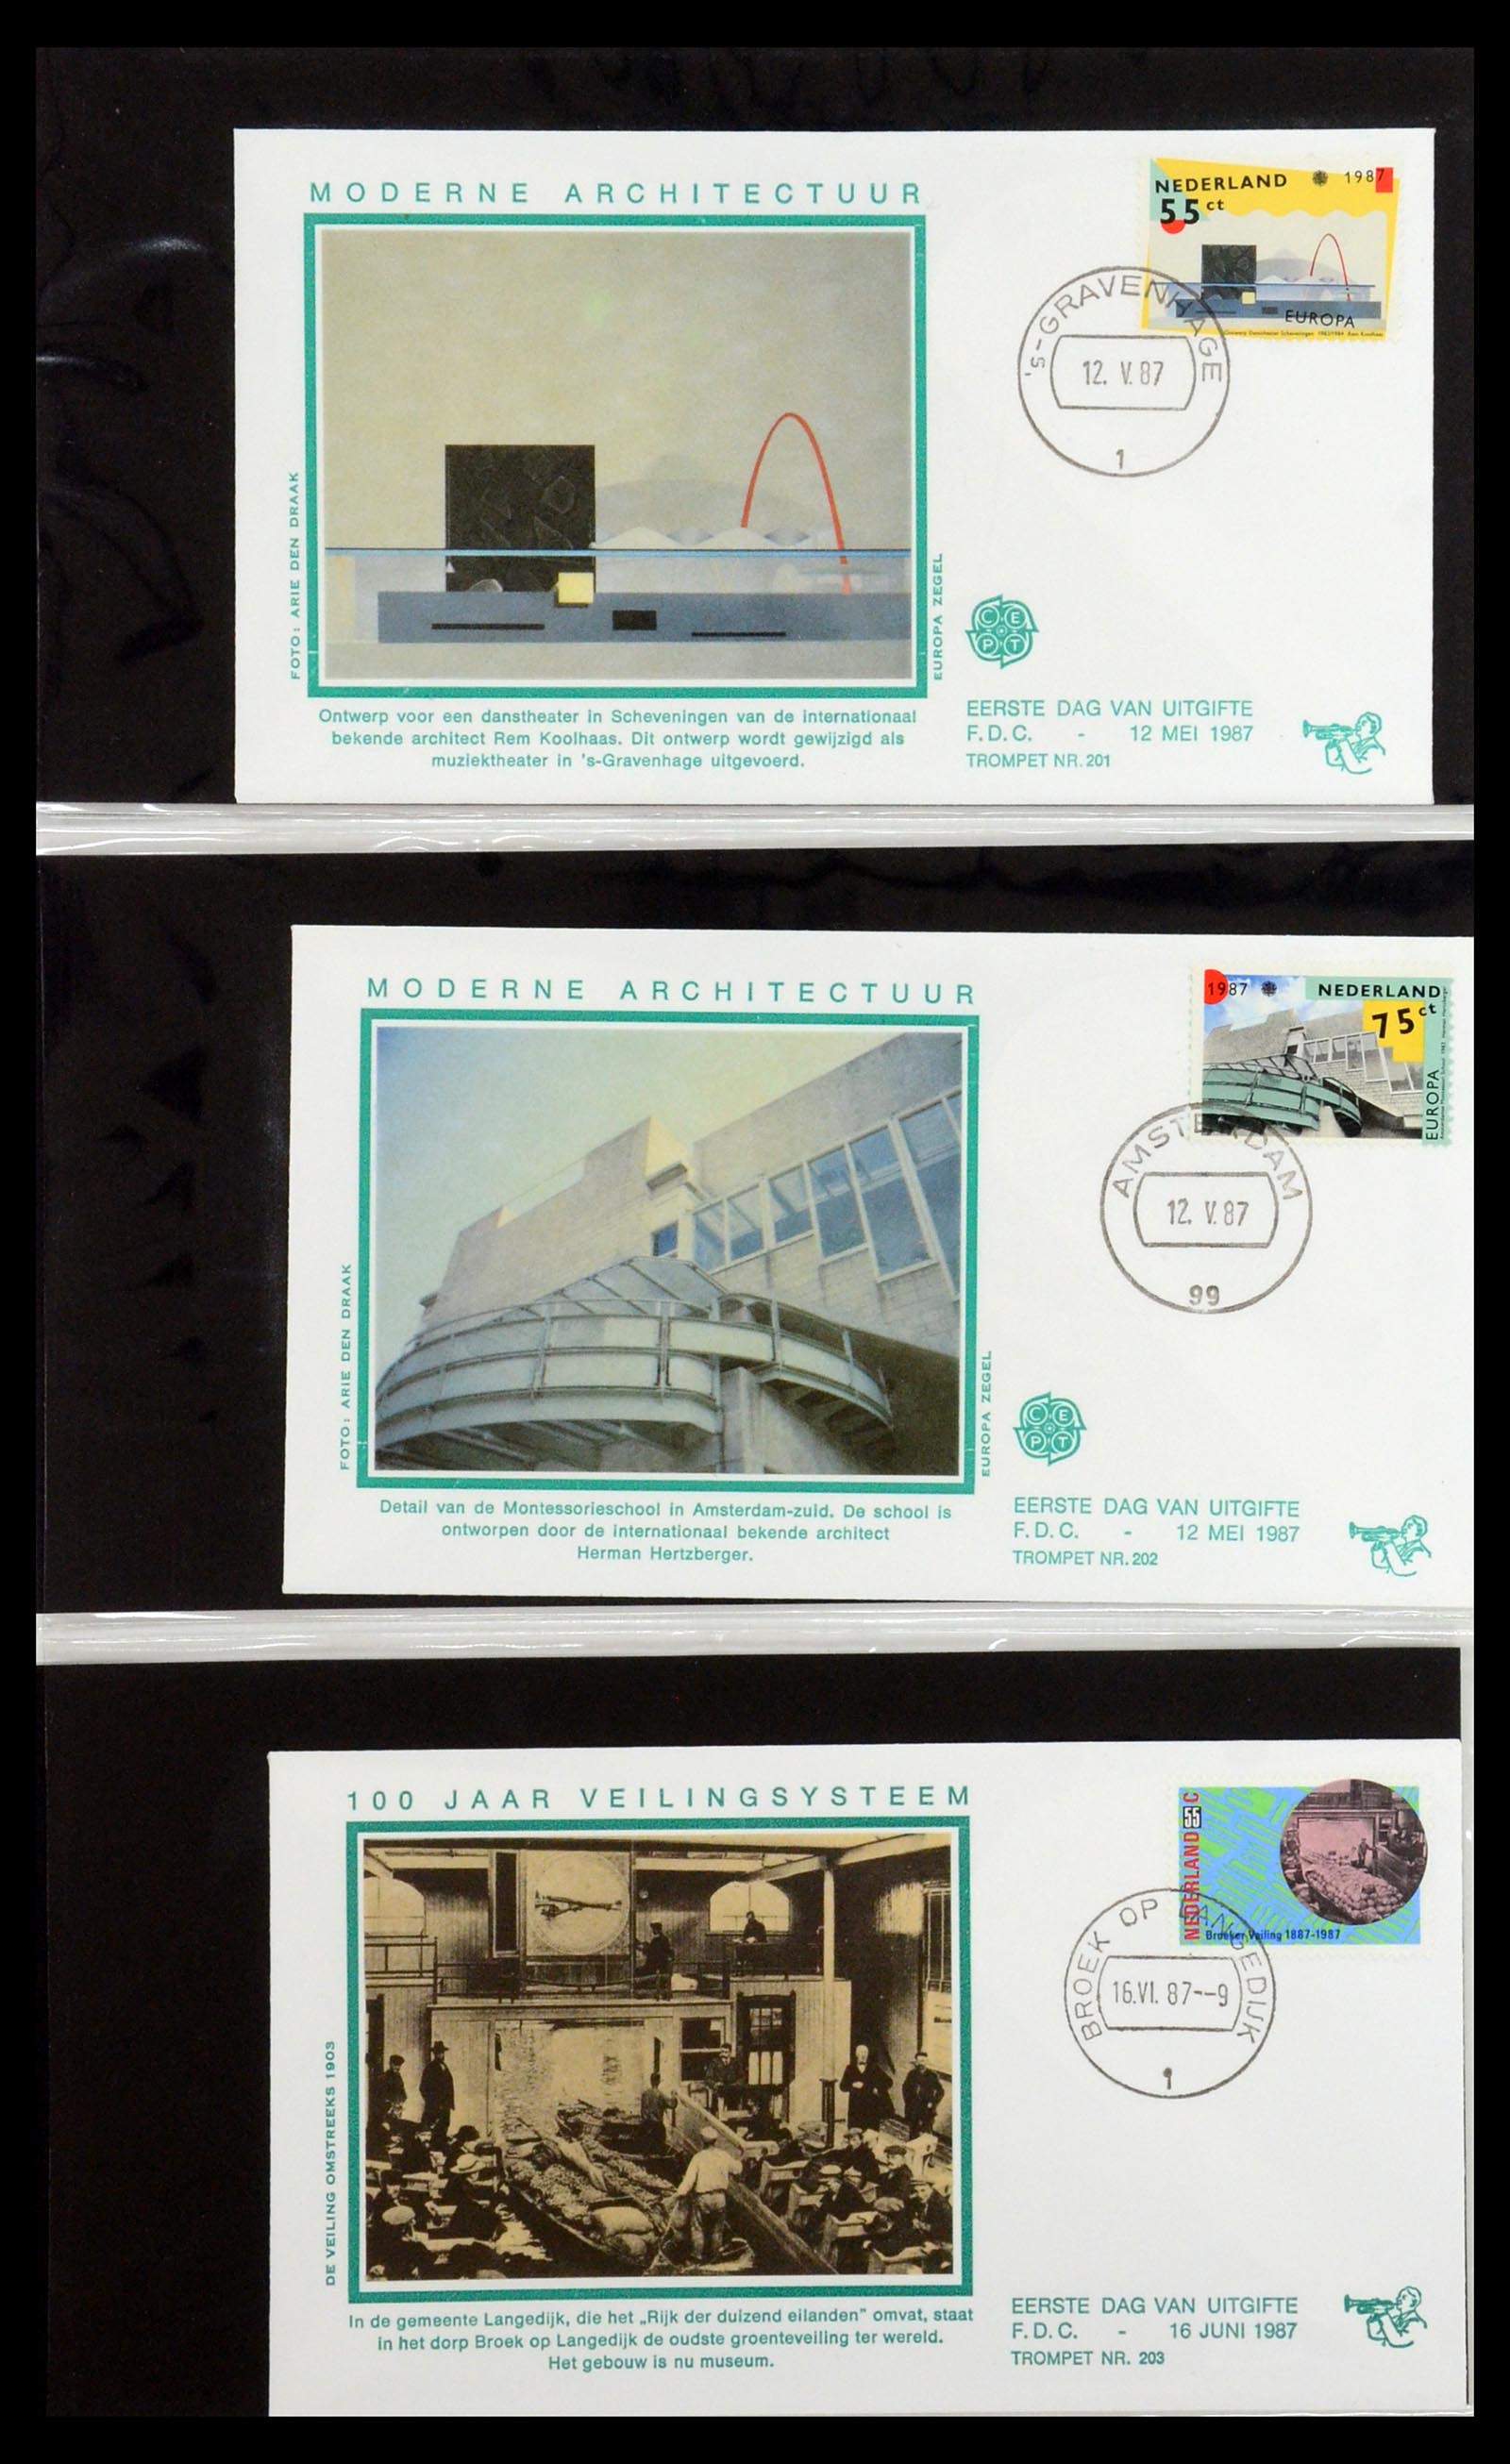 36342 077 - Stamp collection 36342 Netherlands Tromp FDC's 1968-1987.